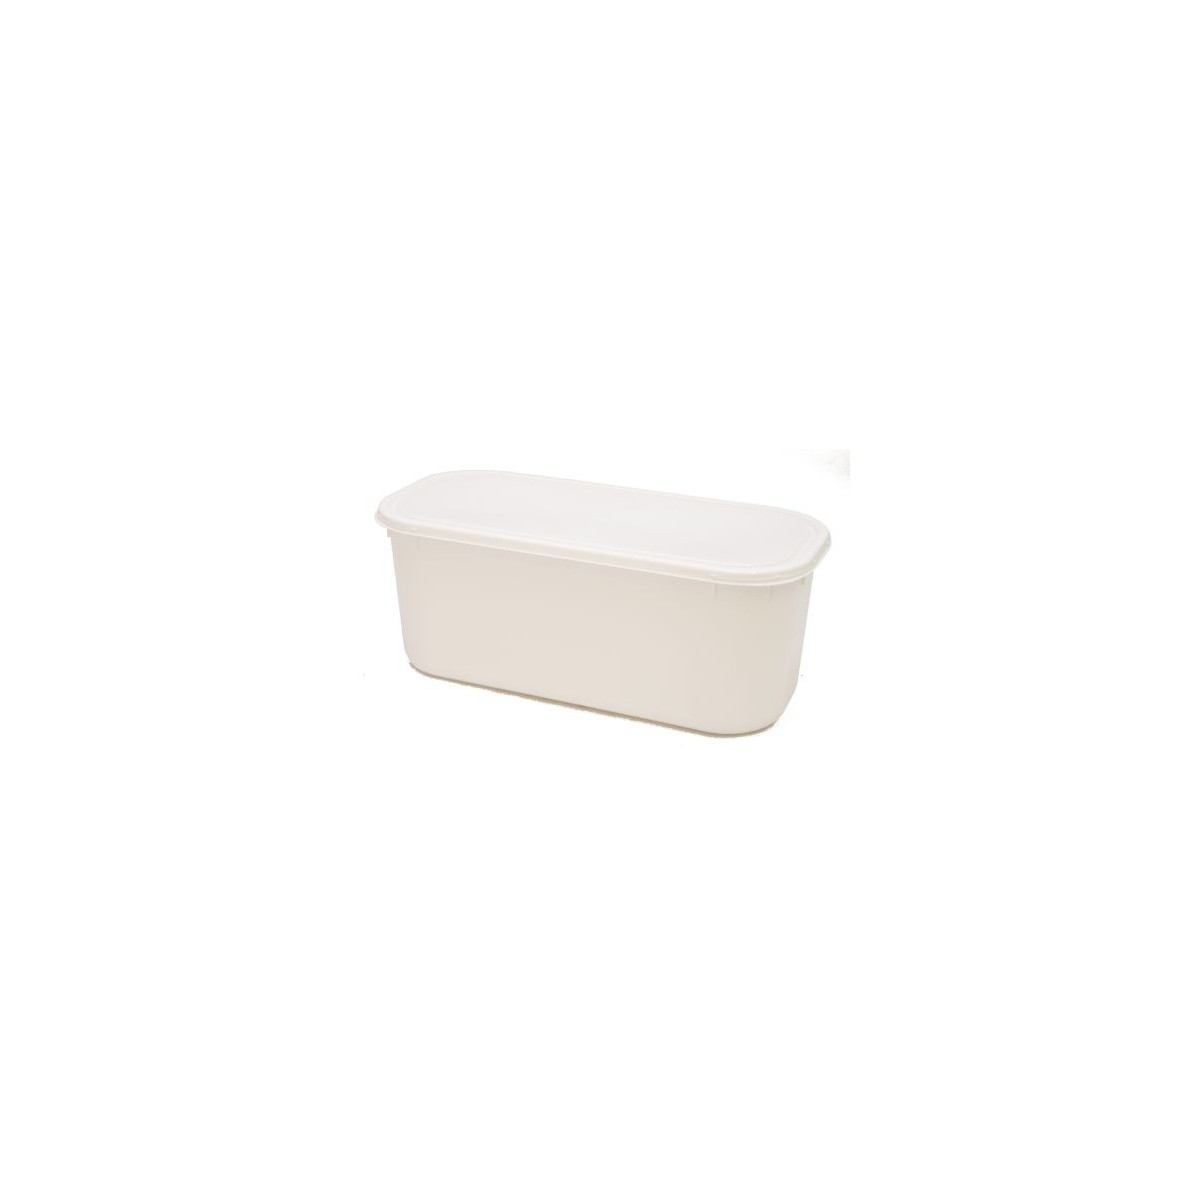 PLASTIC ICE CREAM BOX CADY 5L WITH LID 20 PIECES FOSTPLUS INCLUDED  PIECE